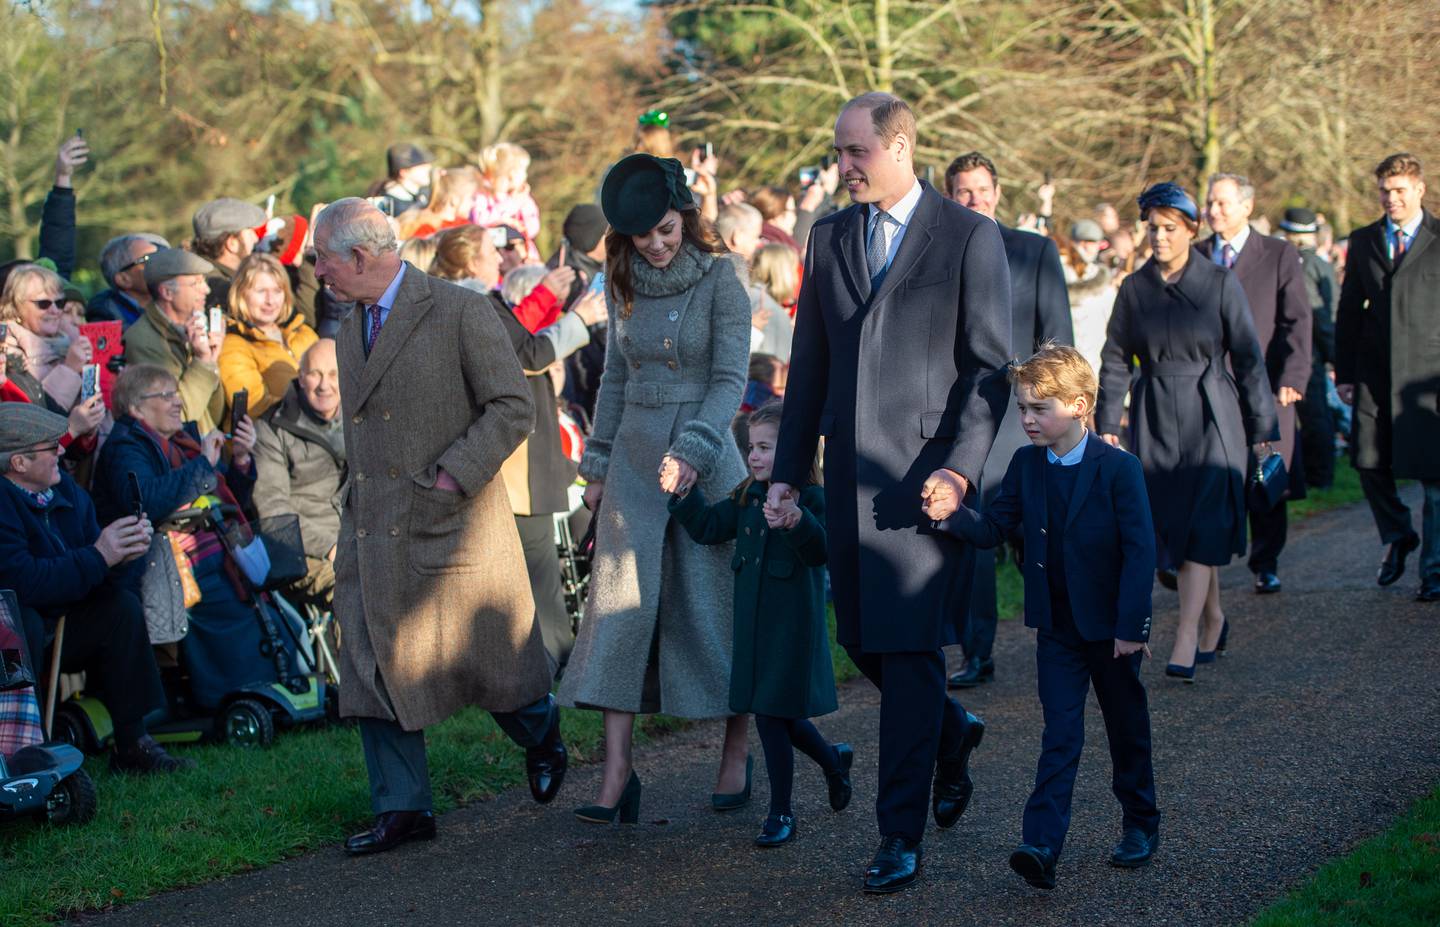 King Charles, the Duke and Duchess of Cambridge and their children arriving for the Christmas Day church service in Sandringham, in 2019.